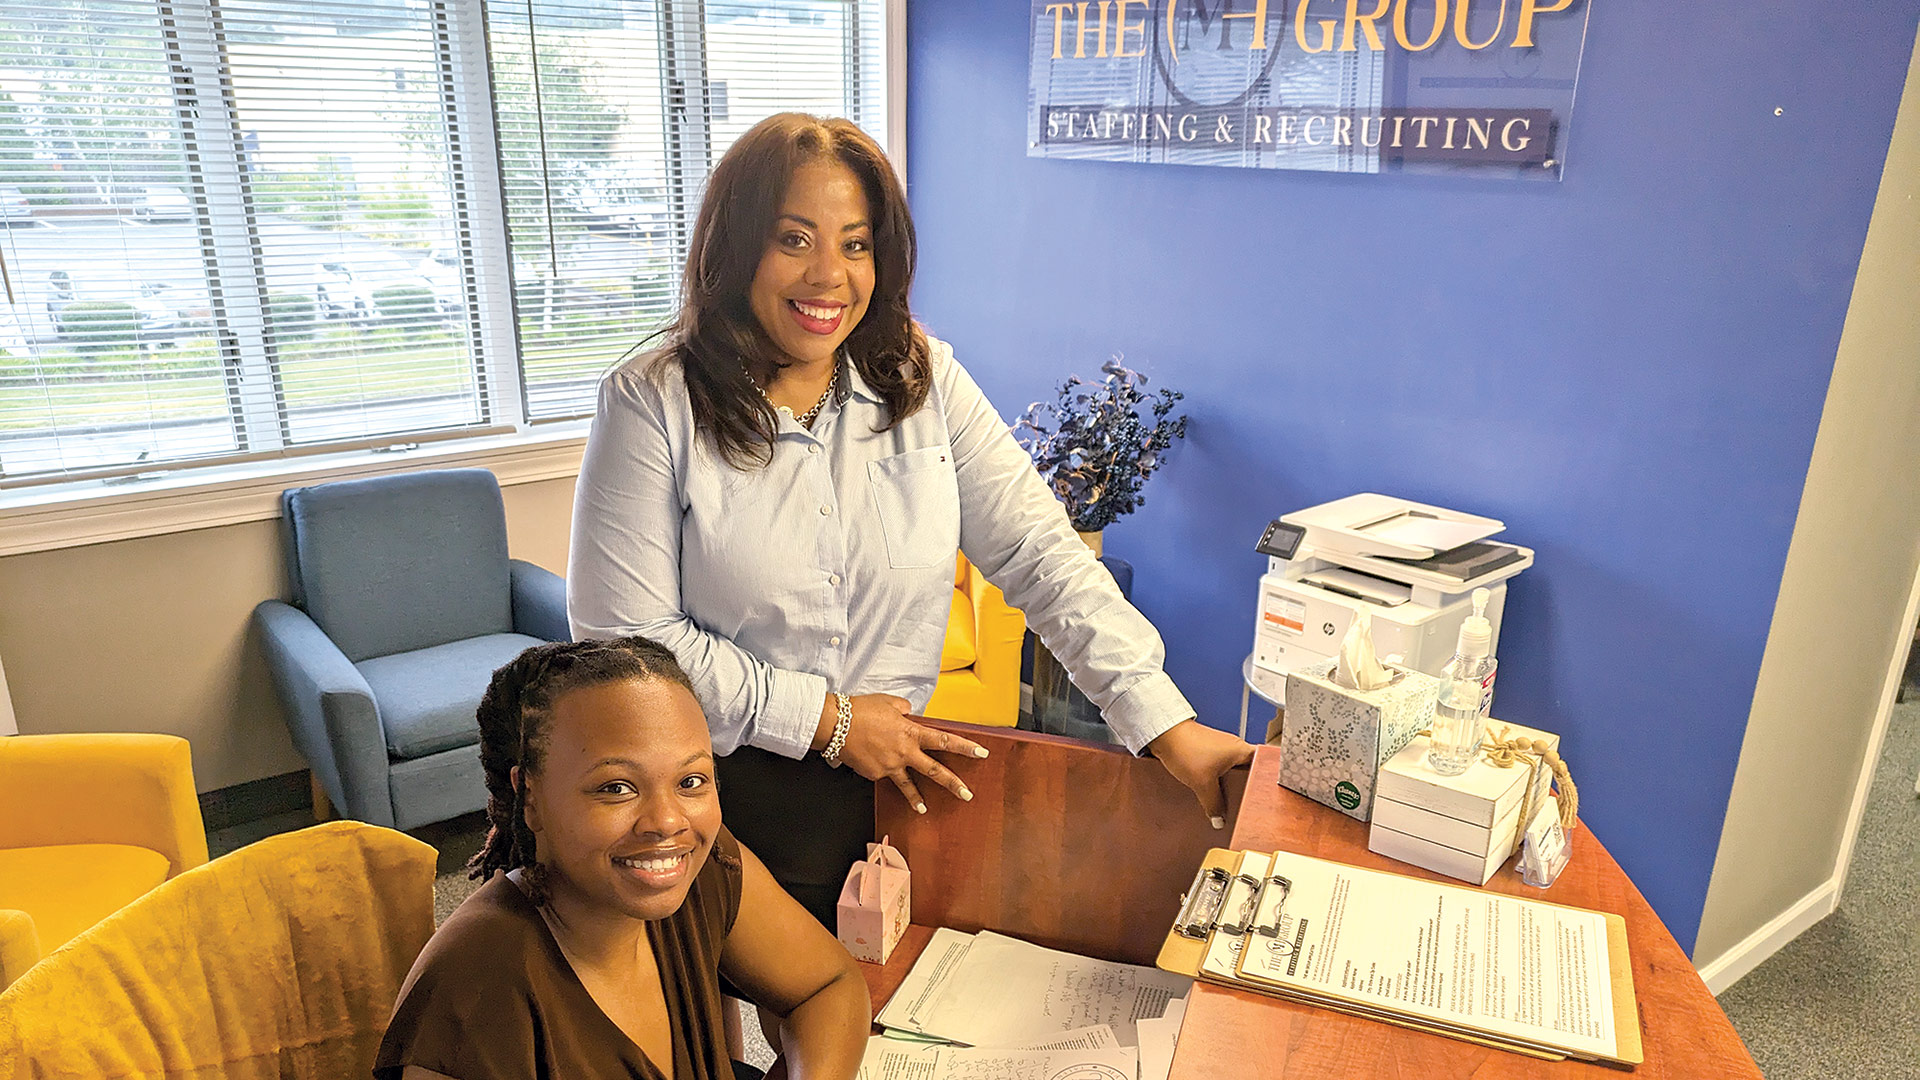 Nicole Polite (top) with Kassaundra Woodall, senior recruiting manager at the MH Group.